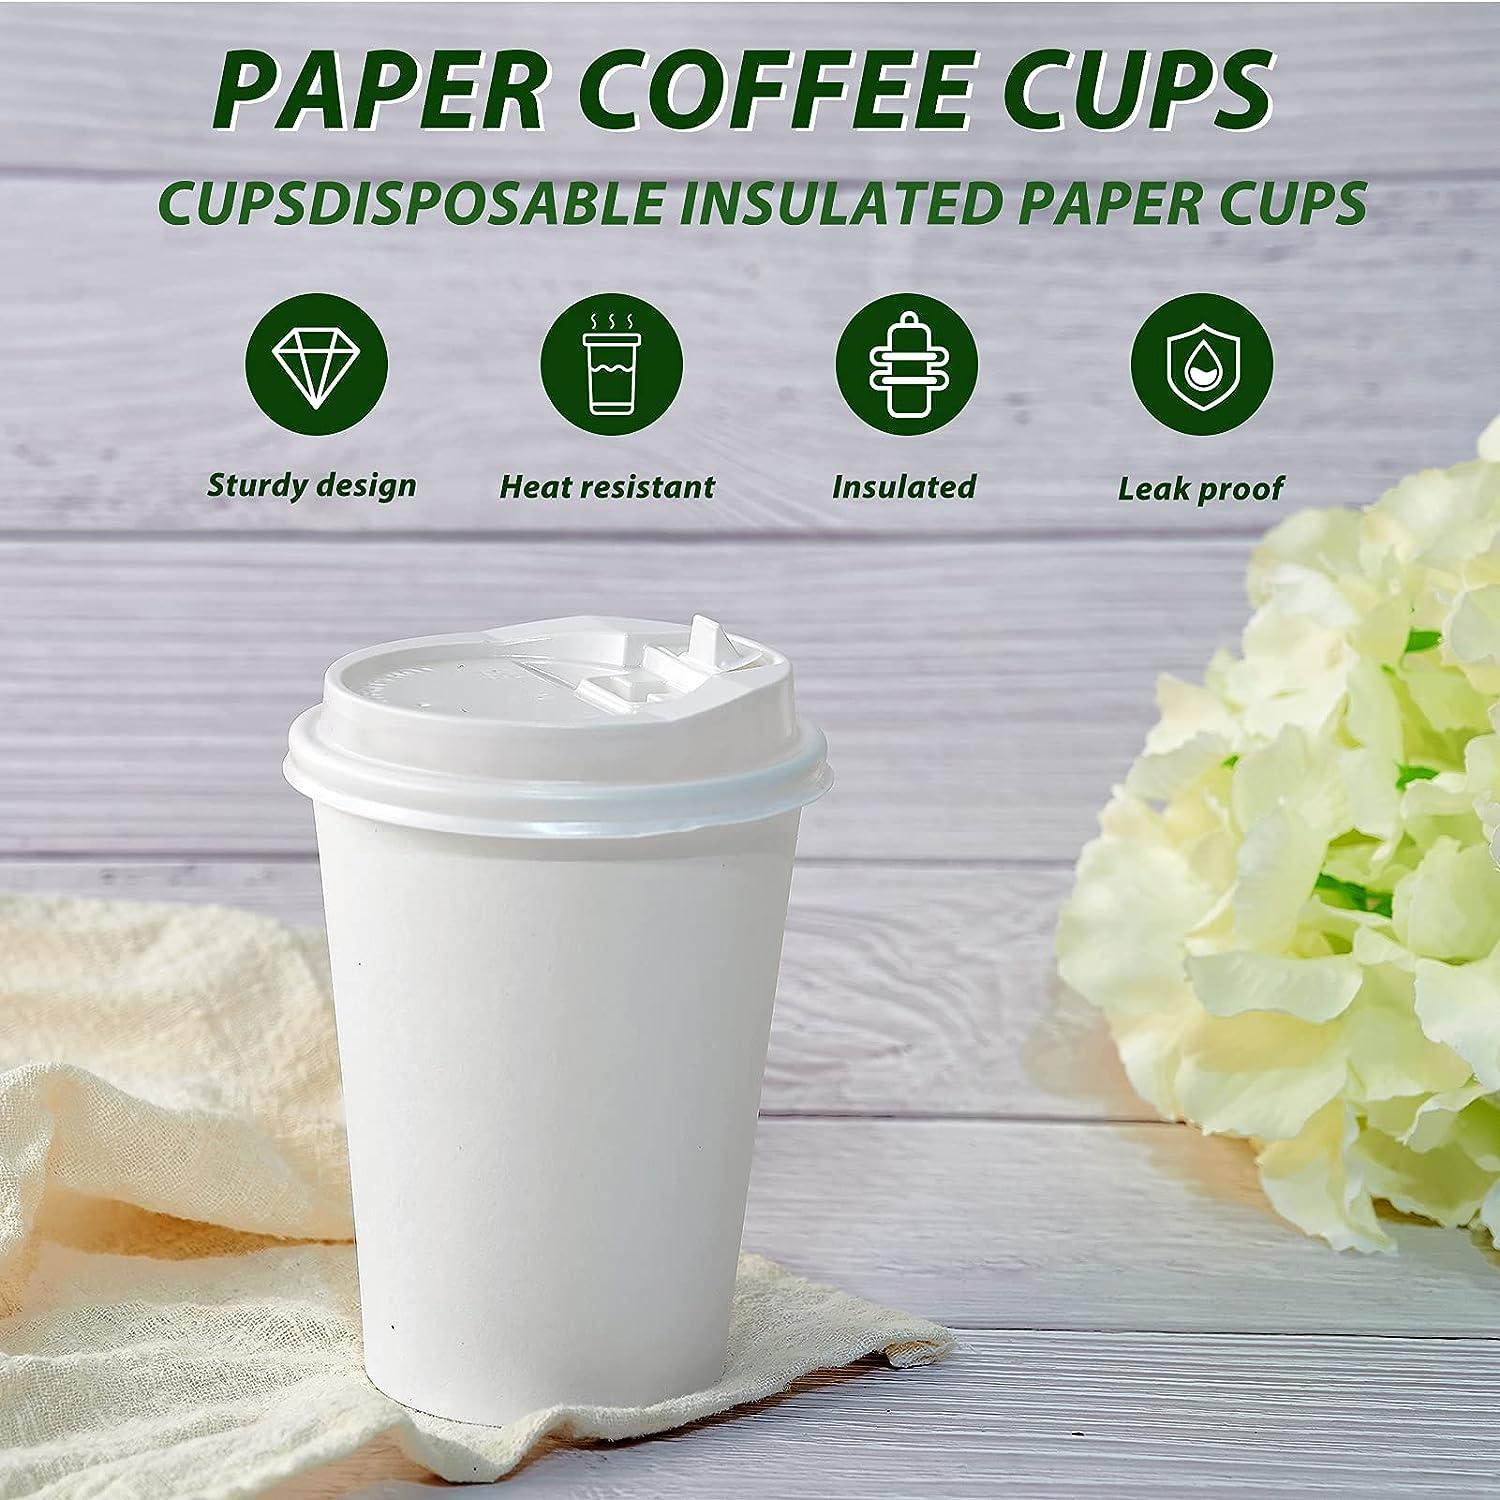 Bloom Floral Hot or Cold Cups - 12 Count